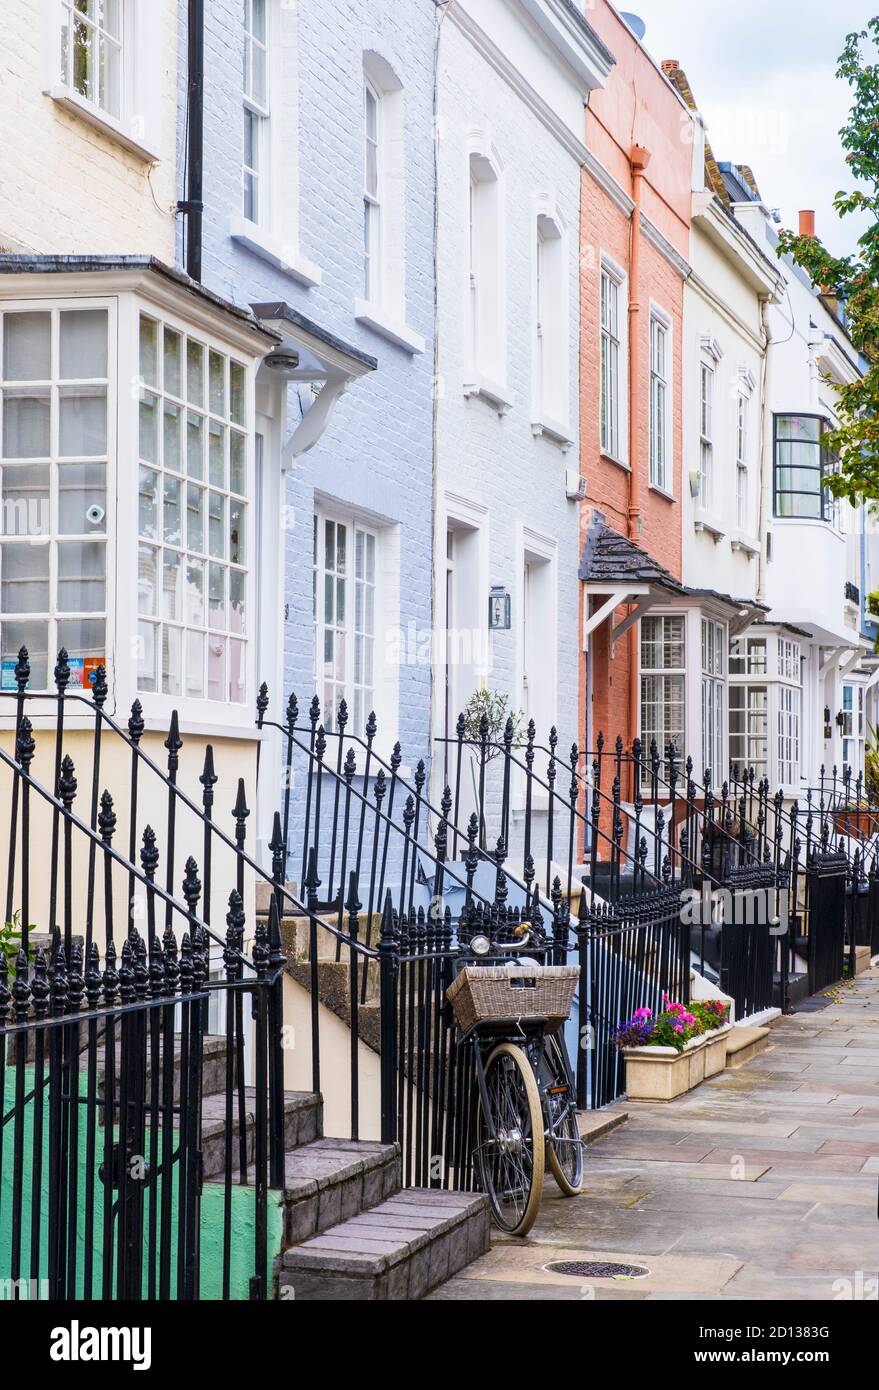 UK, London, Kensington and Chelsea. Brightly painted townhouses on Bywater Street Stock Photo